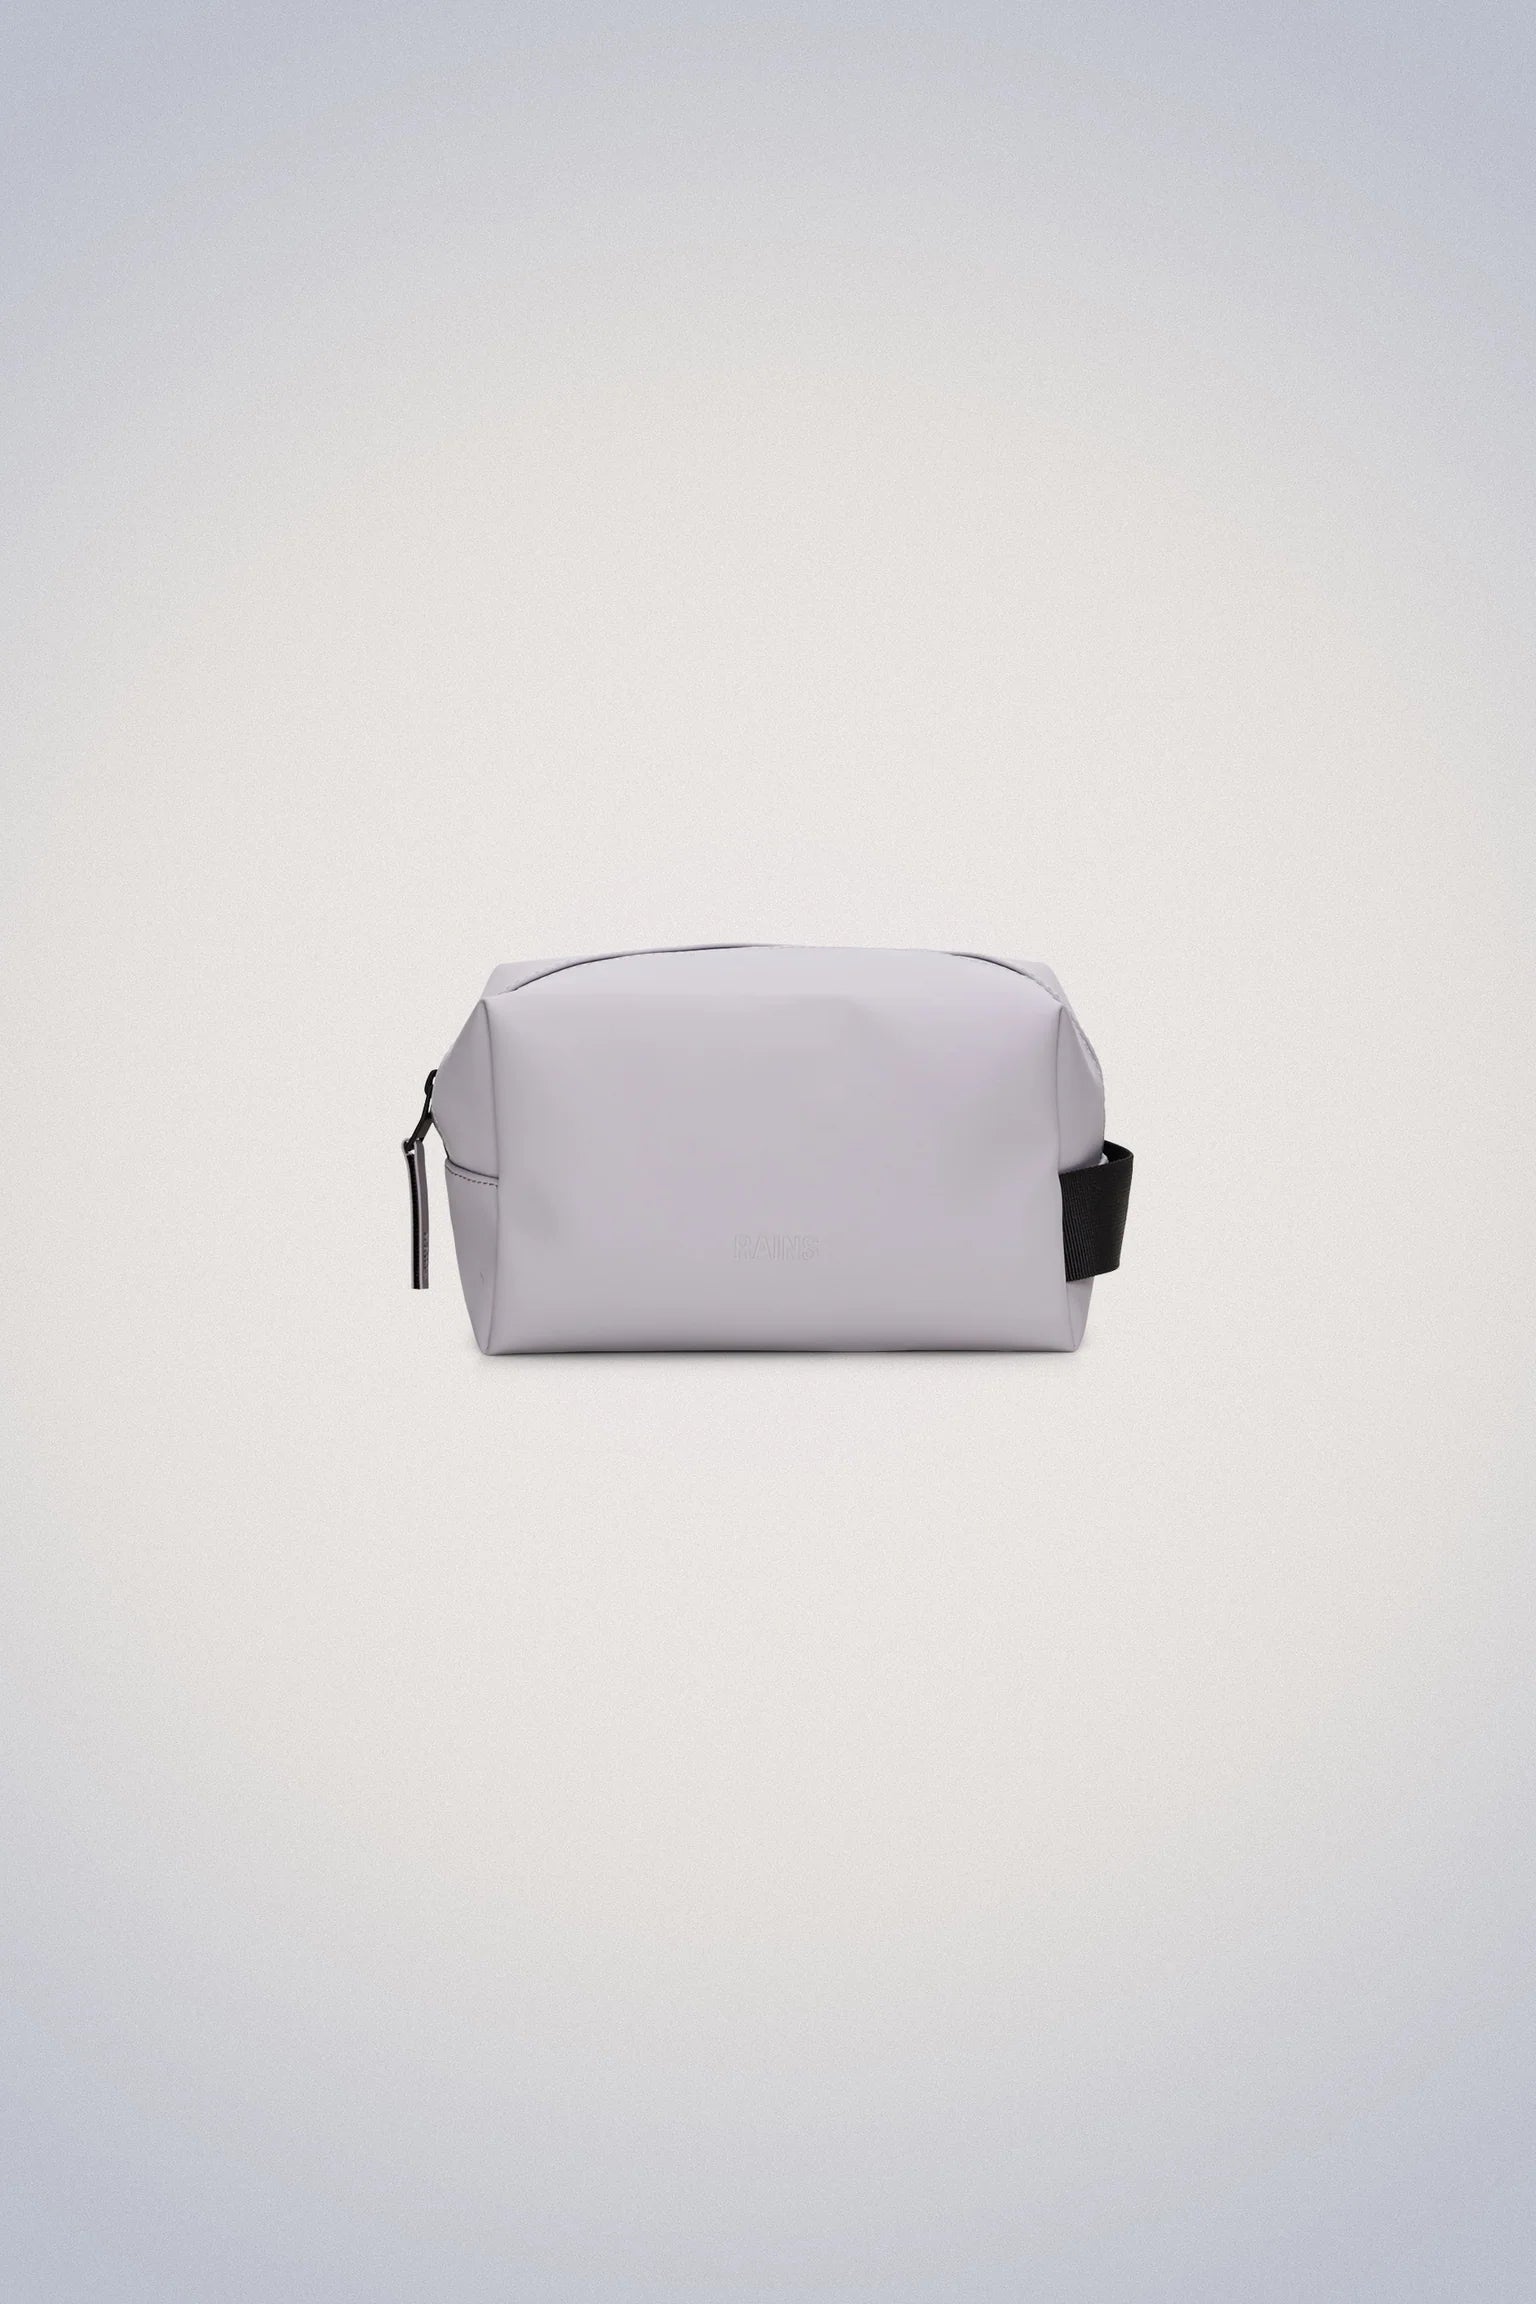 A Rains Wash Bag Small on a white background.